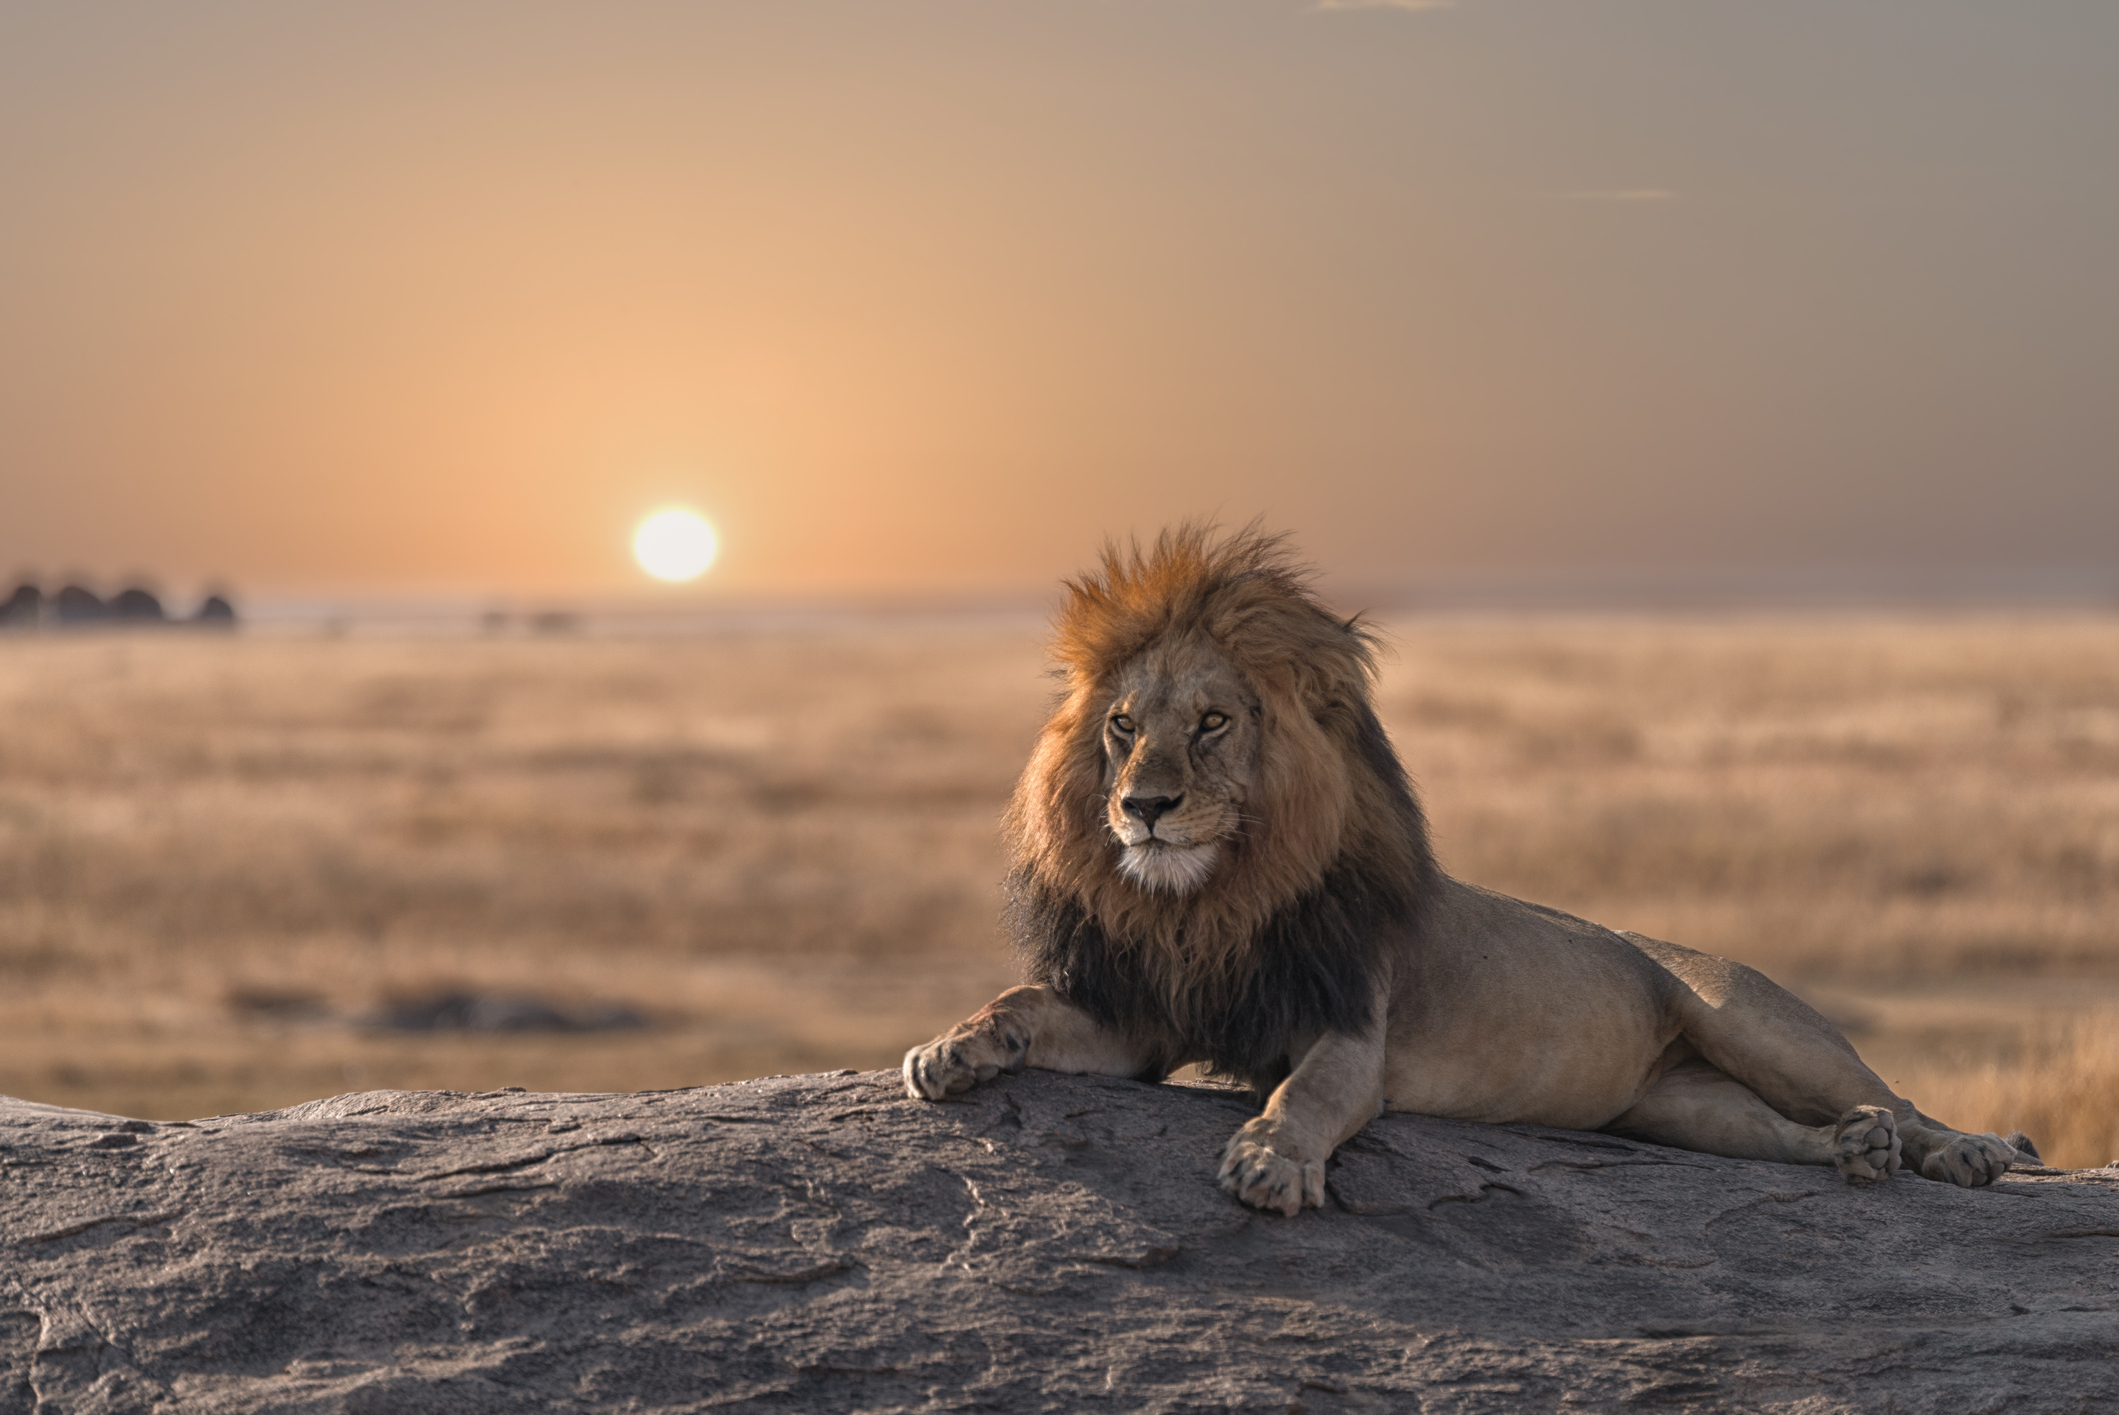 A lion at sunset in the Serengeti